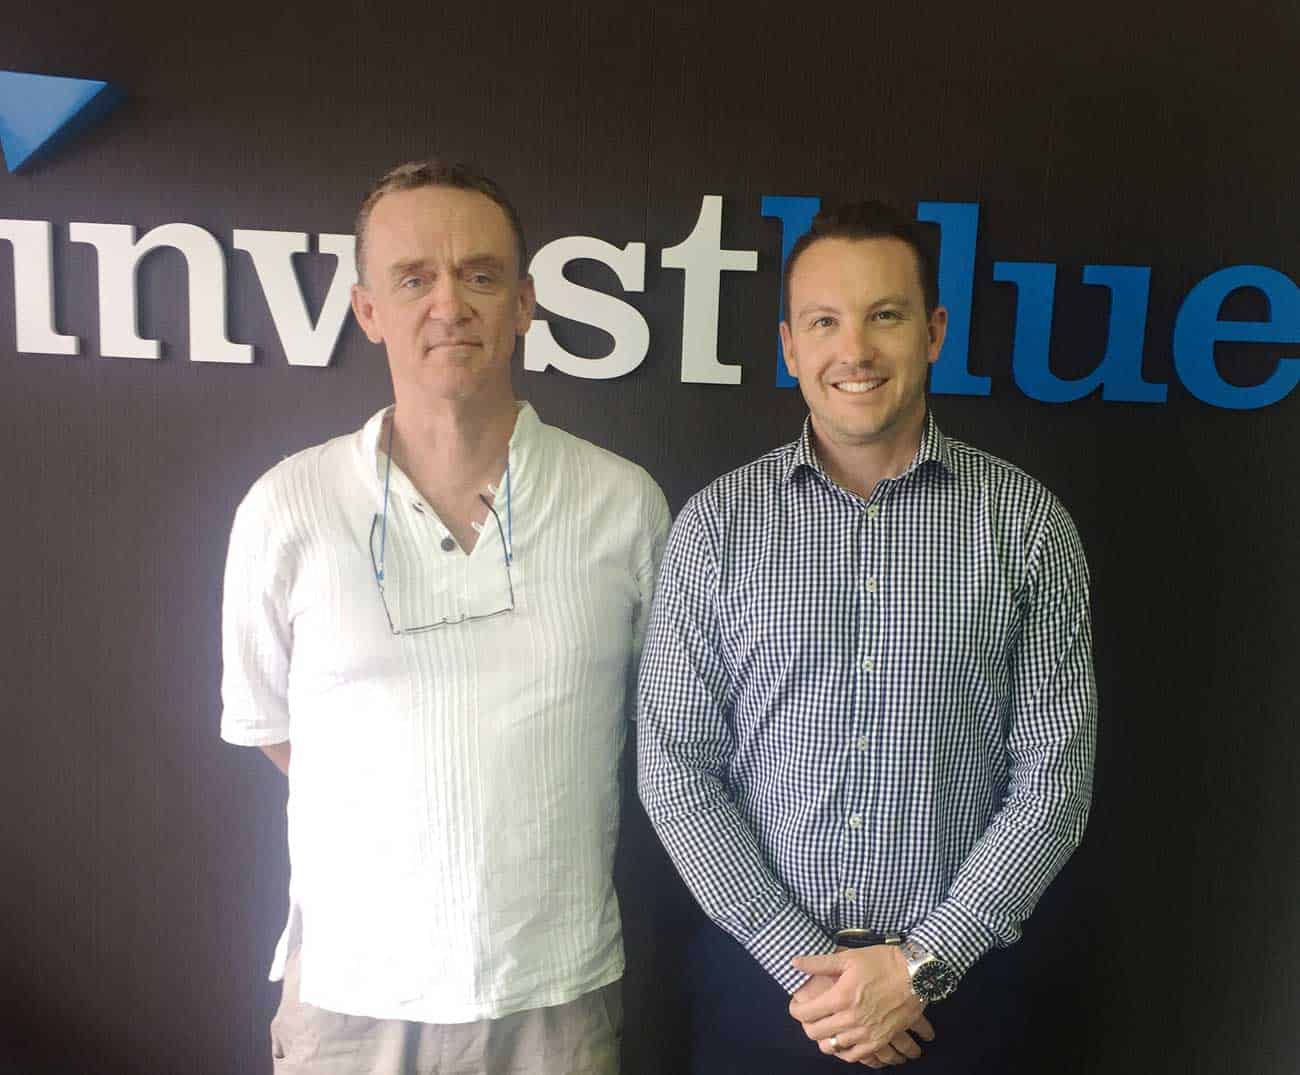 Shane and Ben at the Invest Blue Coffs Harbour Office